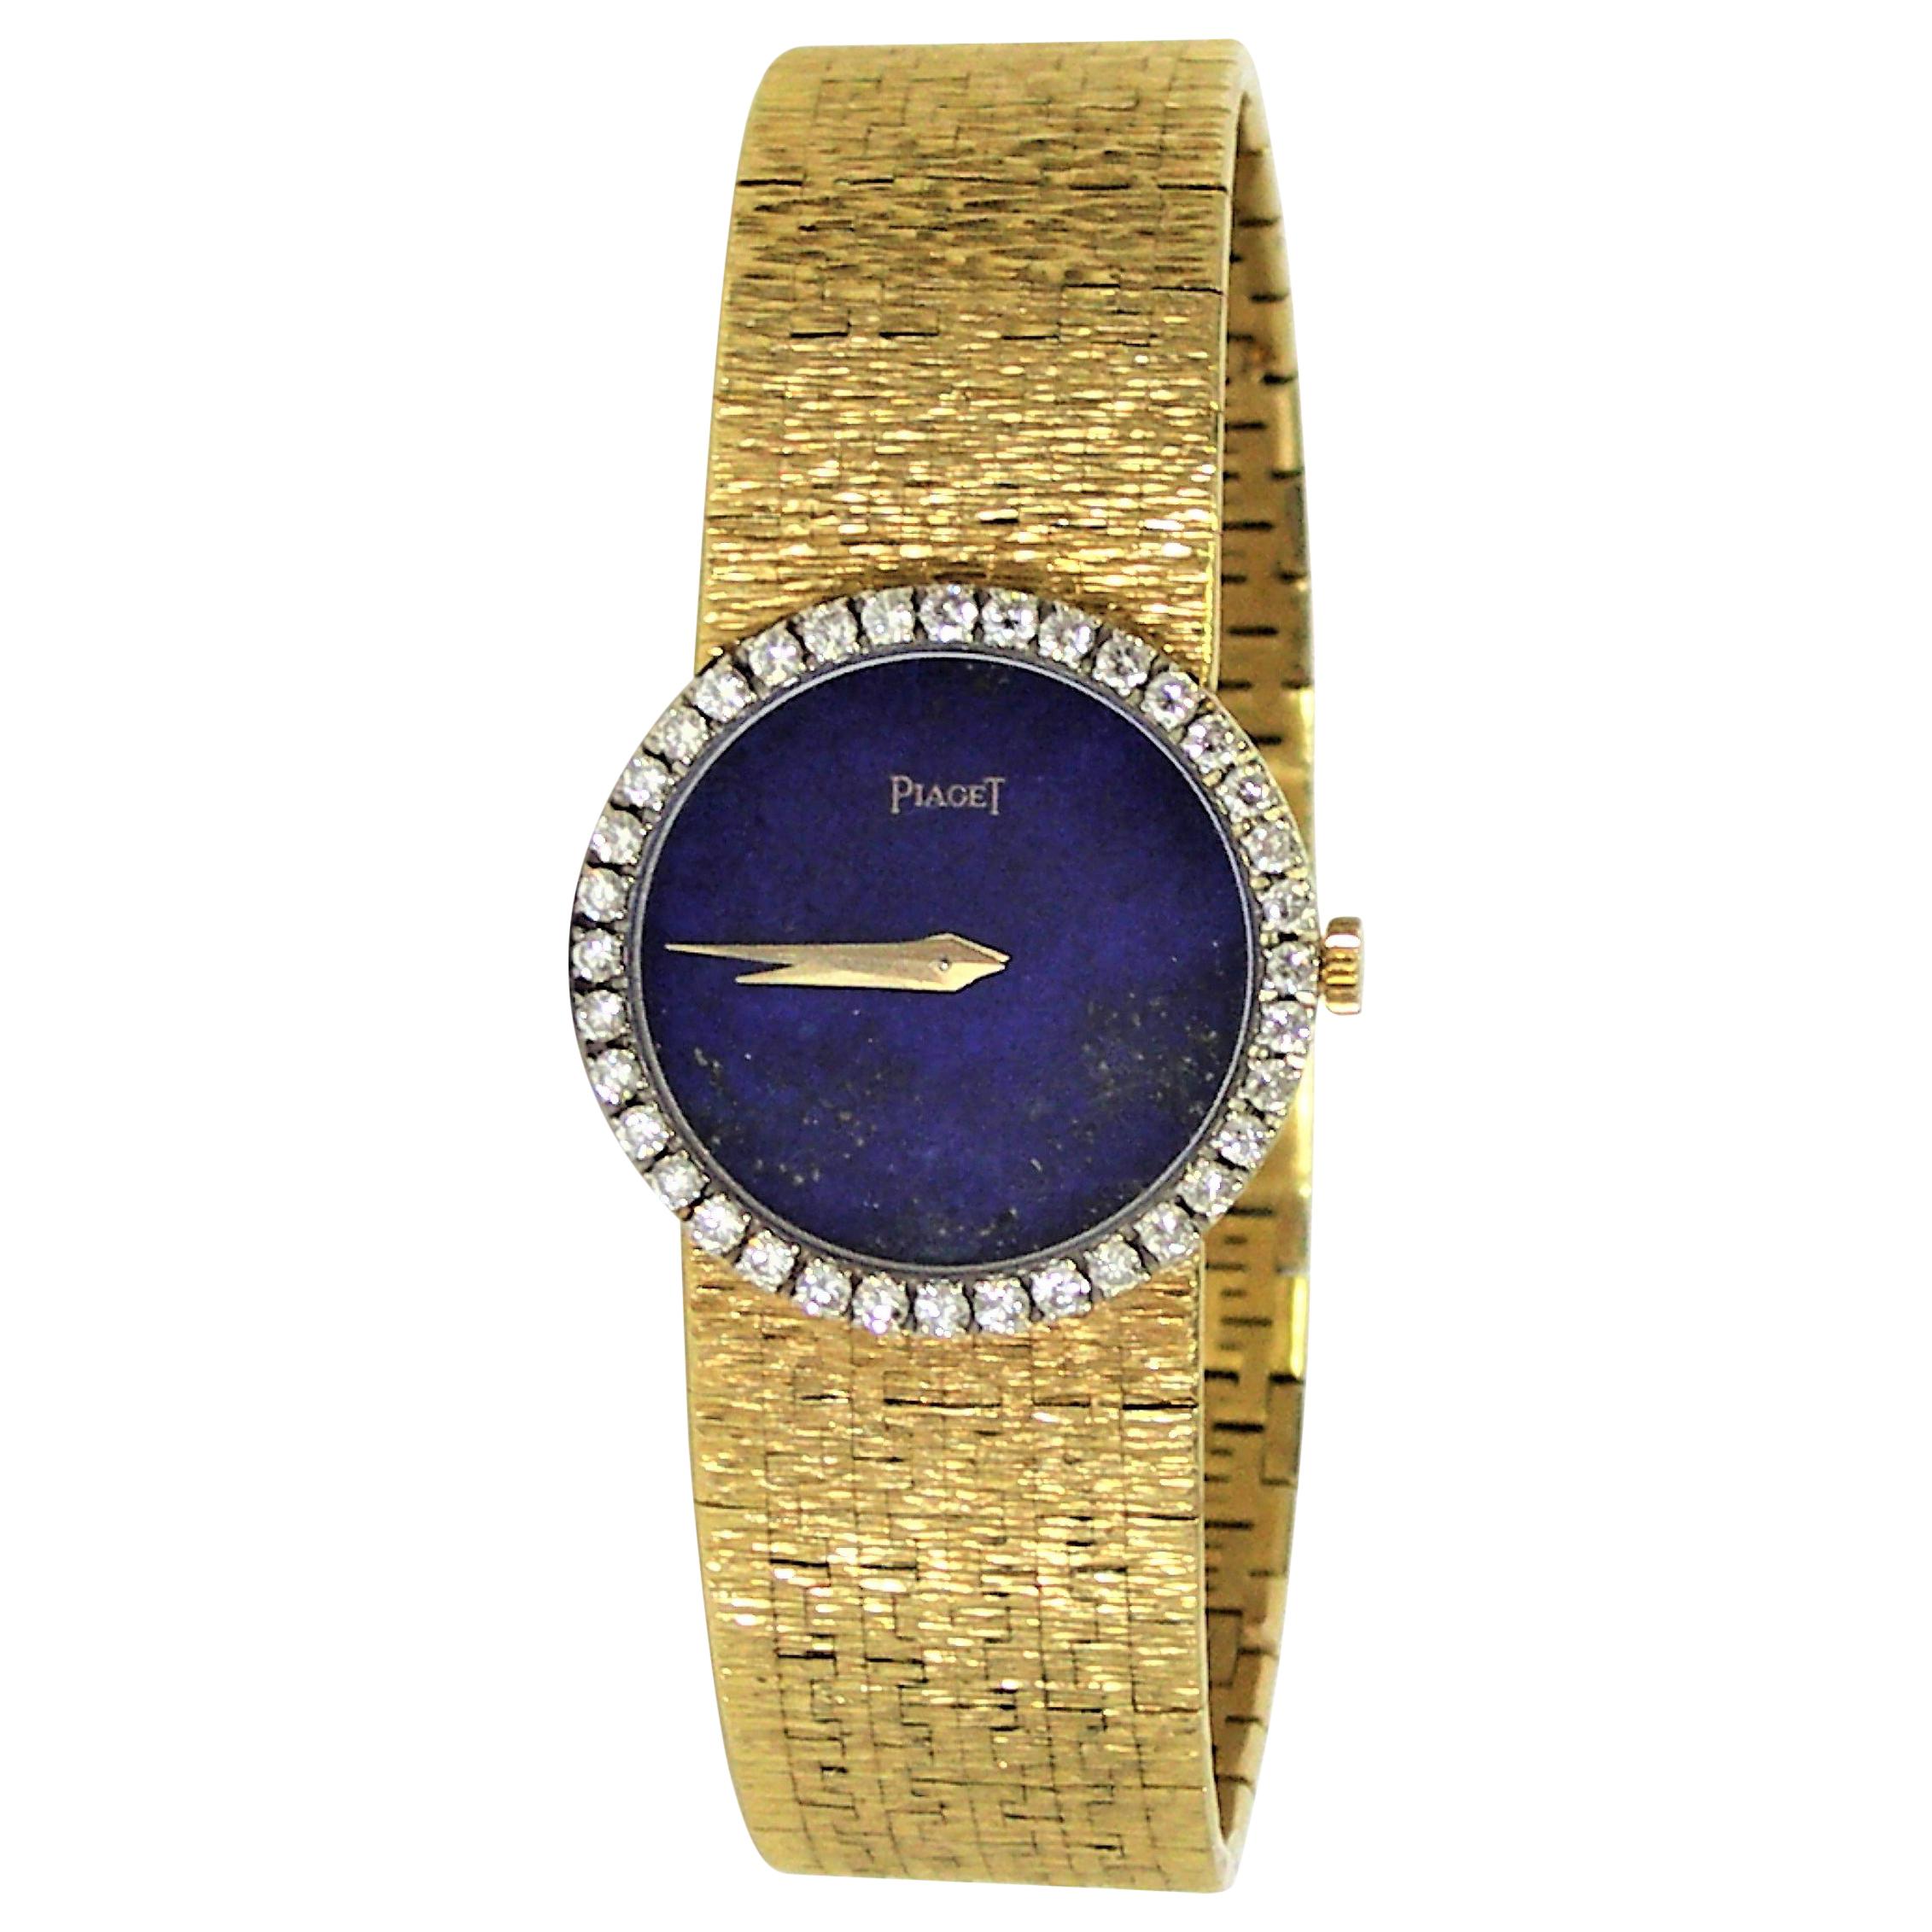 Ladies Piaget Watch with Lapis Dial and Diamond Bezel